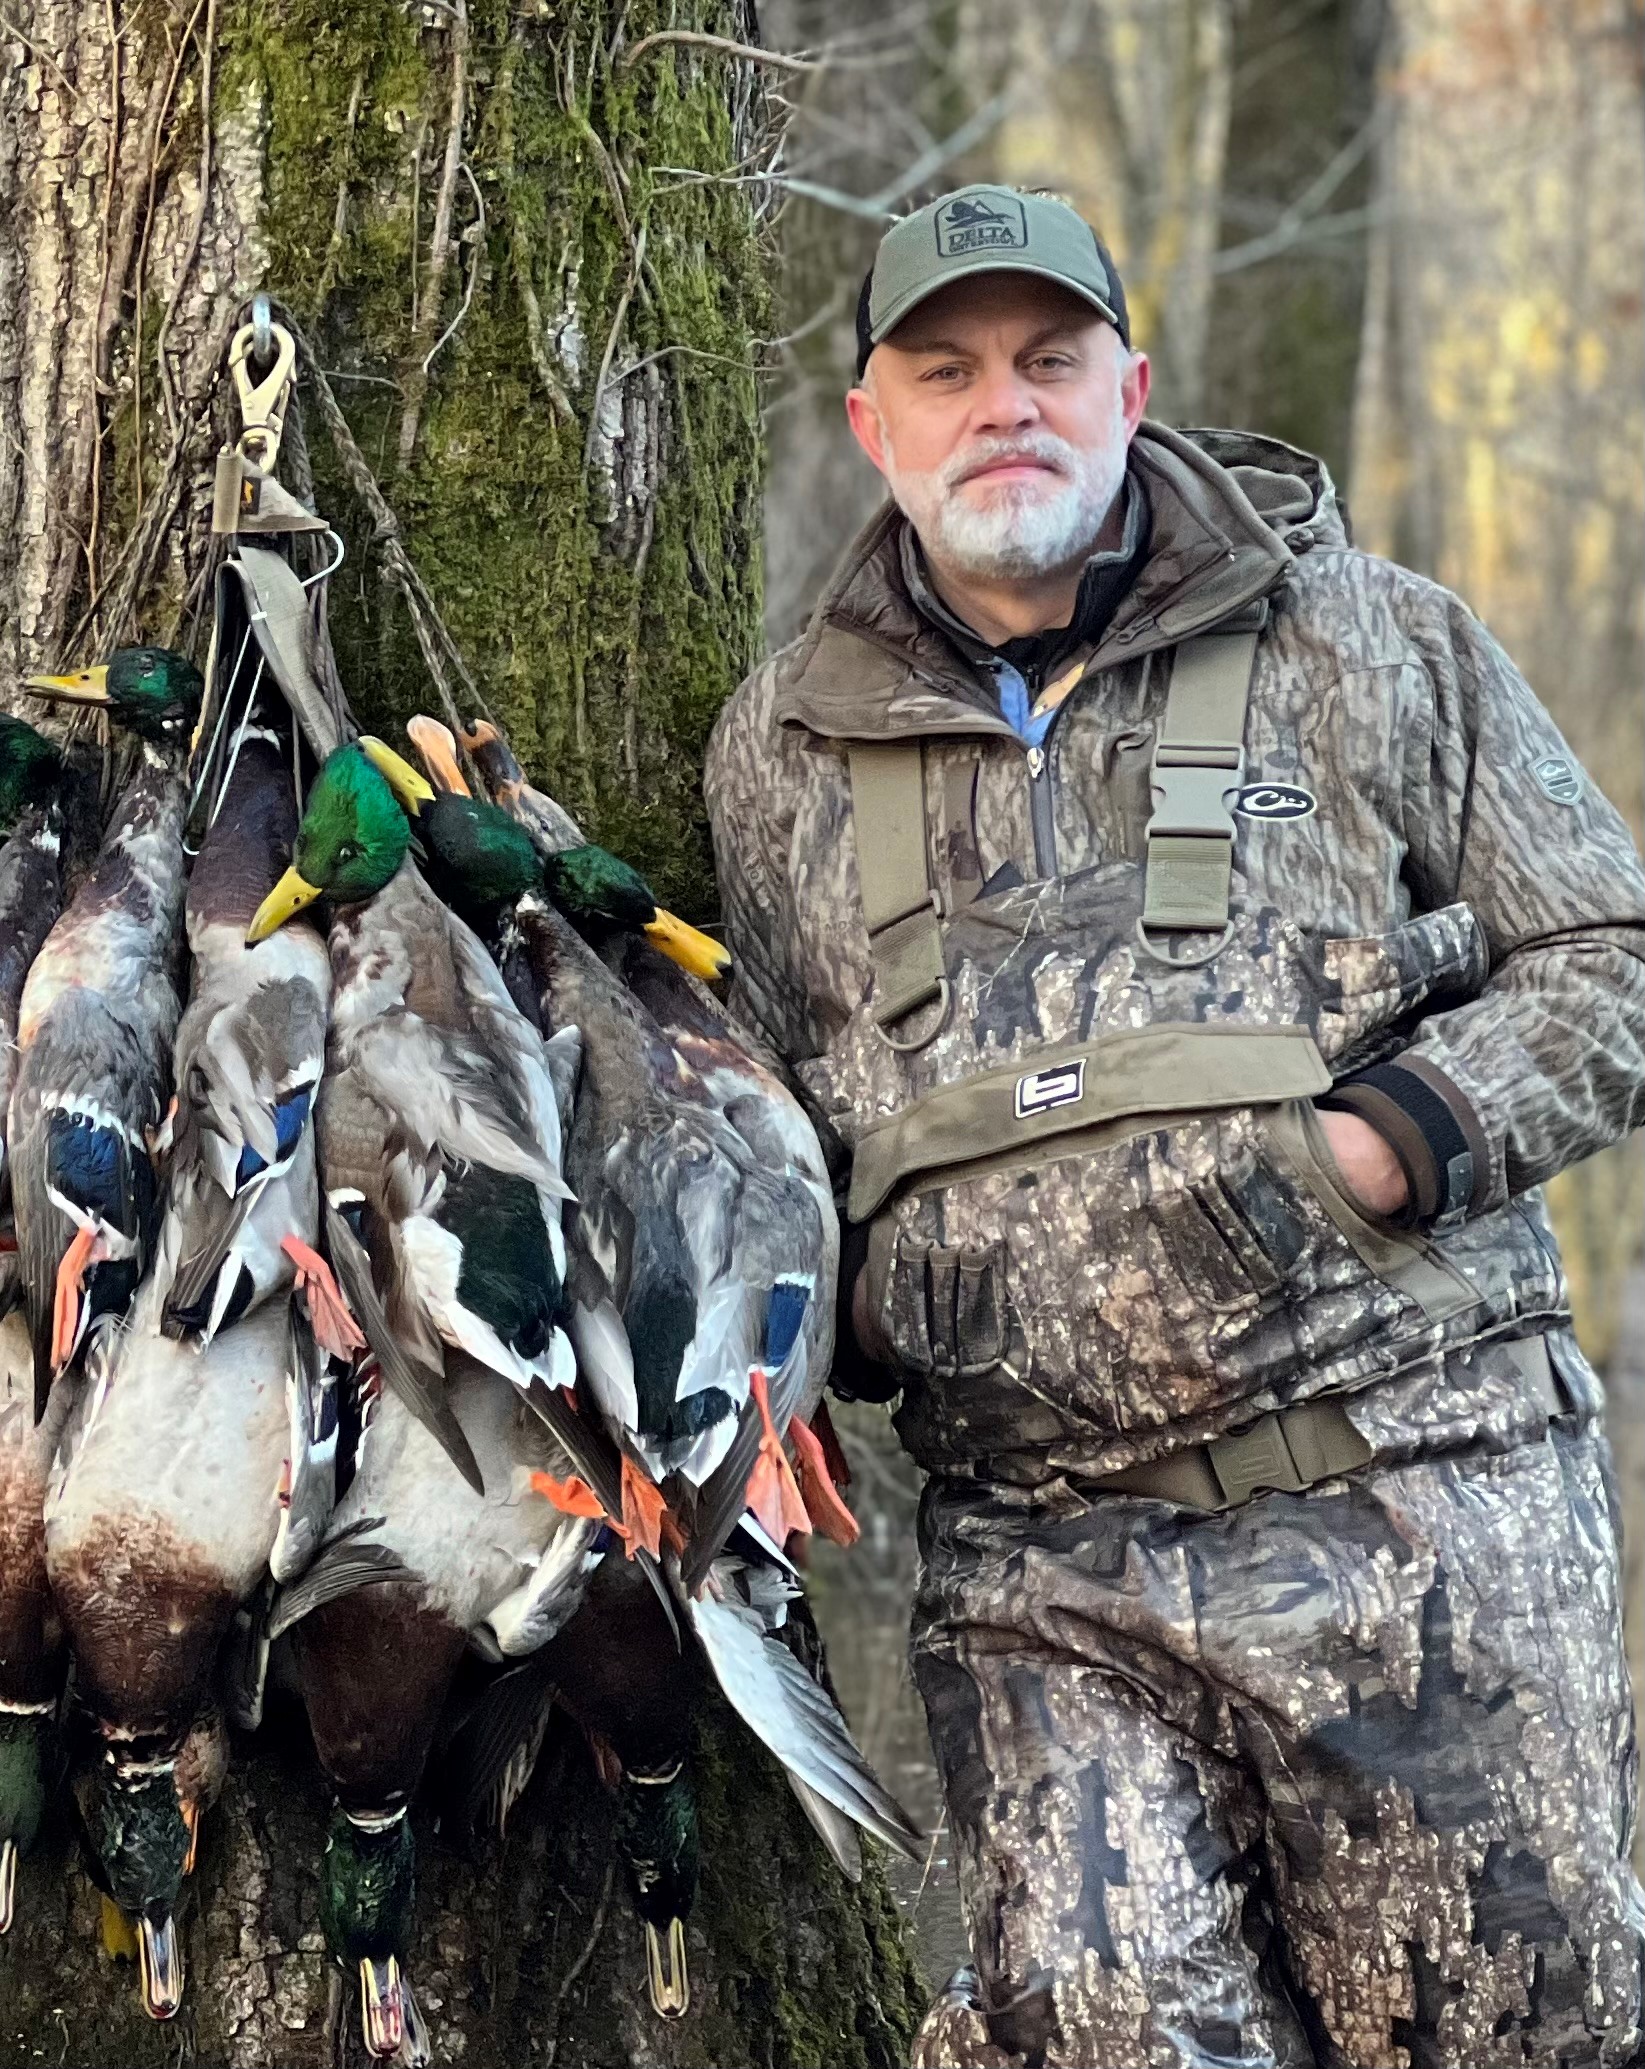 Jeff Howell is a VP of Major Gifts for Delta Waterfowl